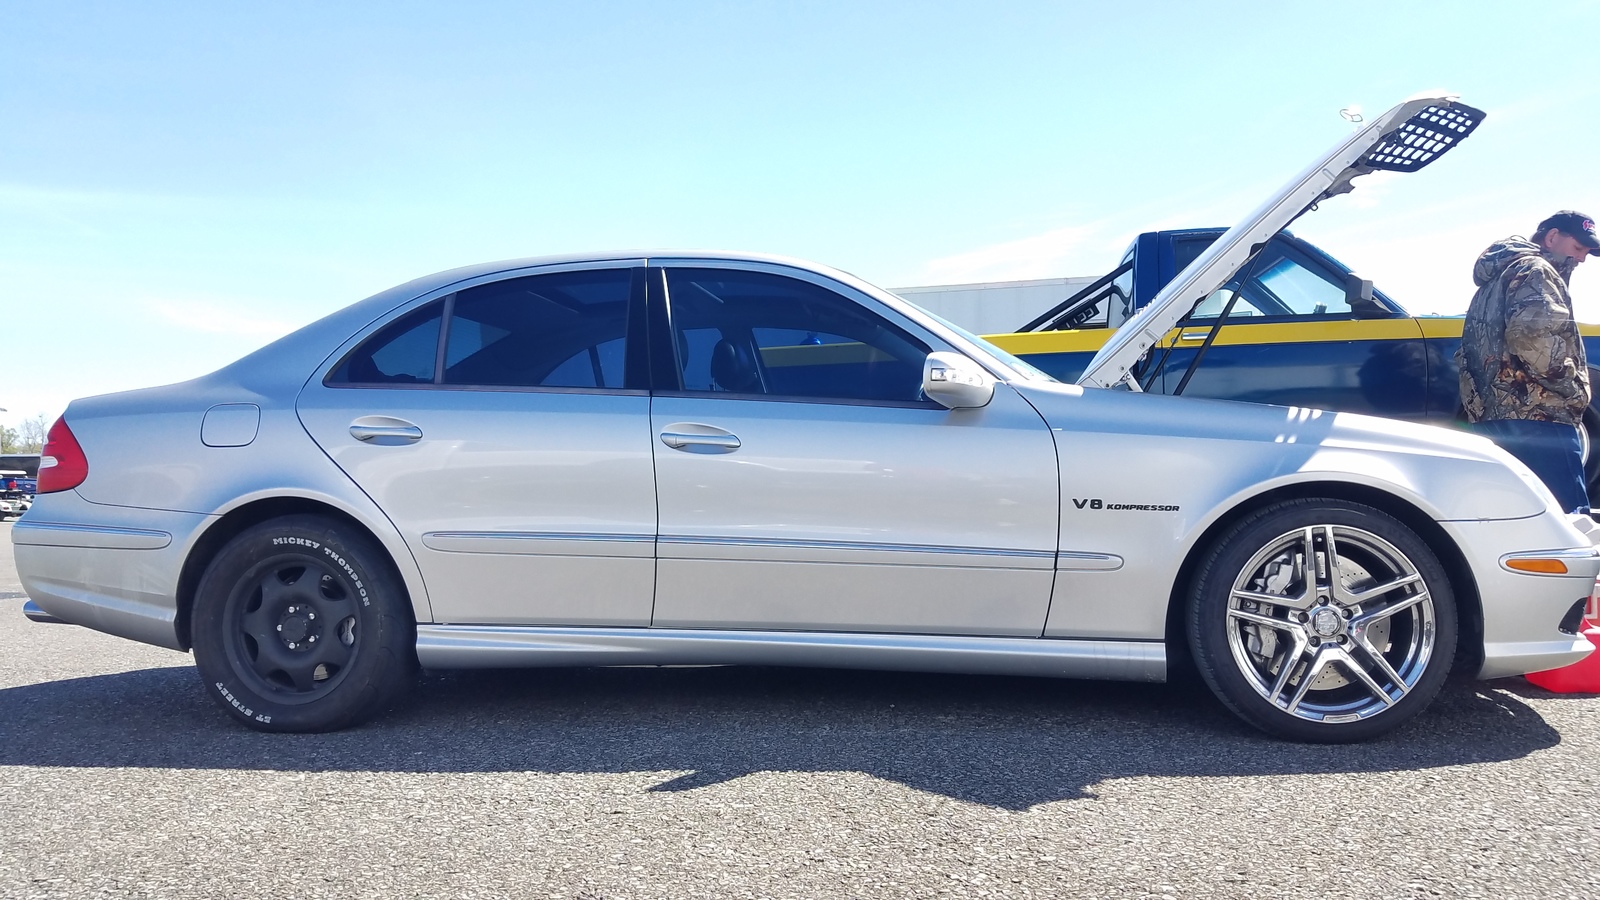 2005 Silver Mercedes-Benz E55 AMG Eurocharged (Cutt) picture, mods, upgrades